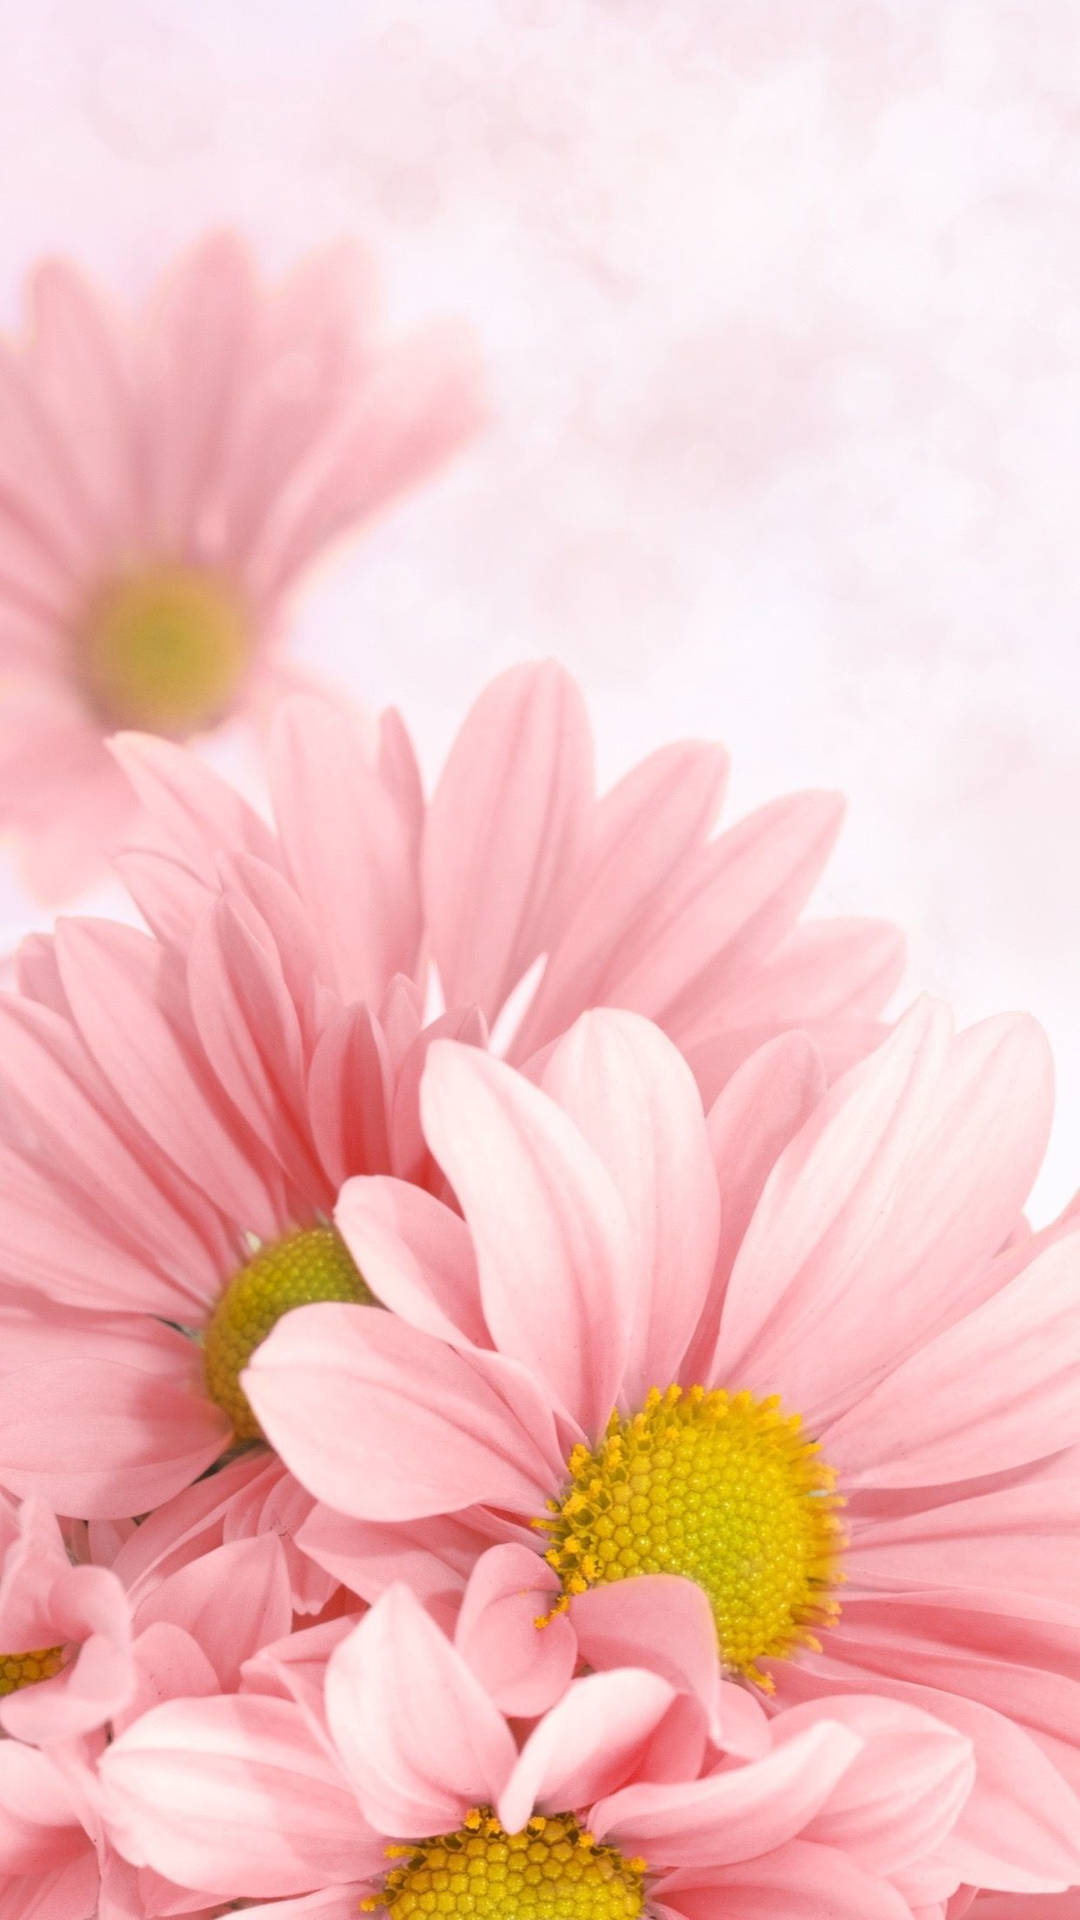 Vibrant Pink Daisy On A Smartphone